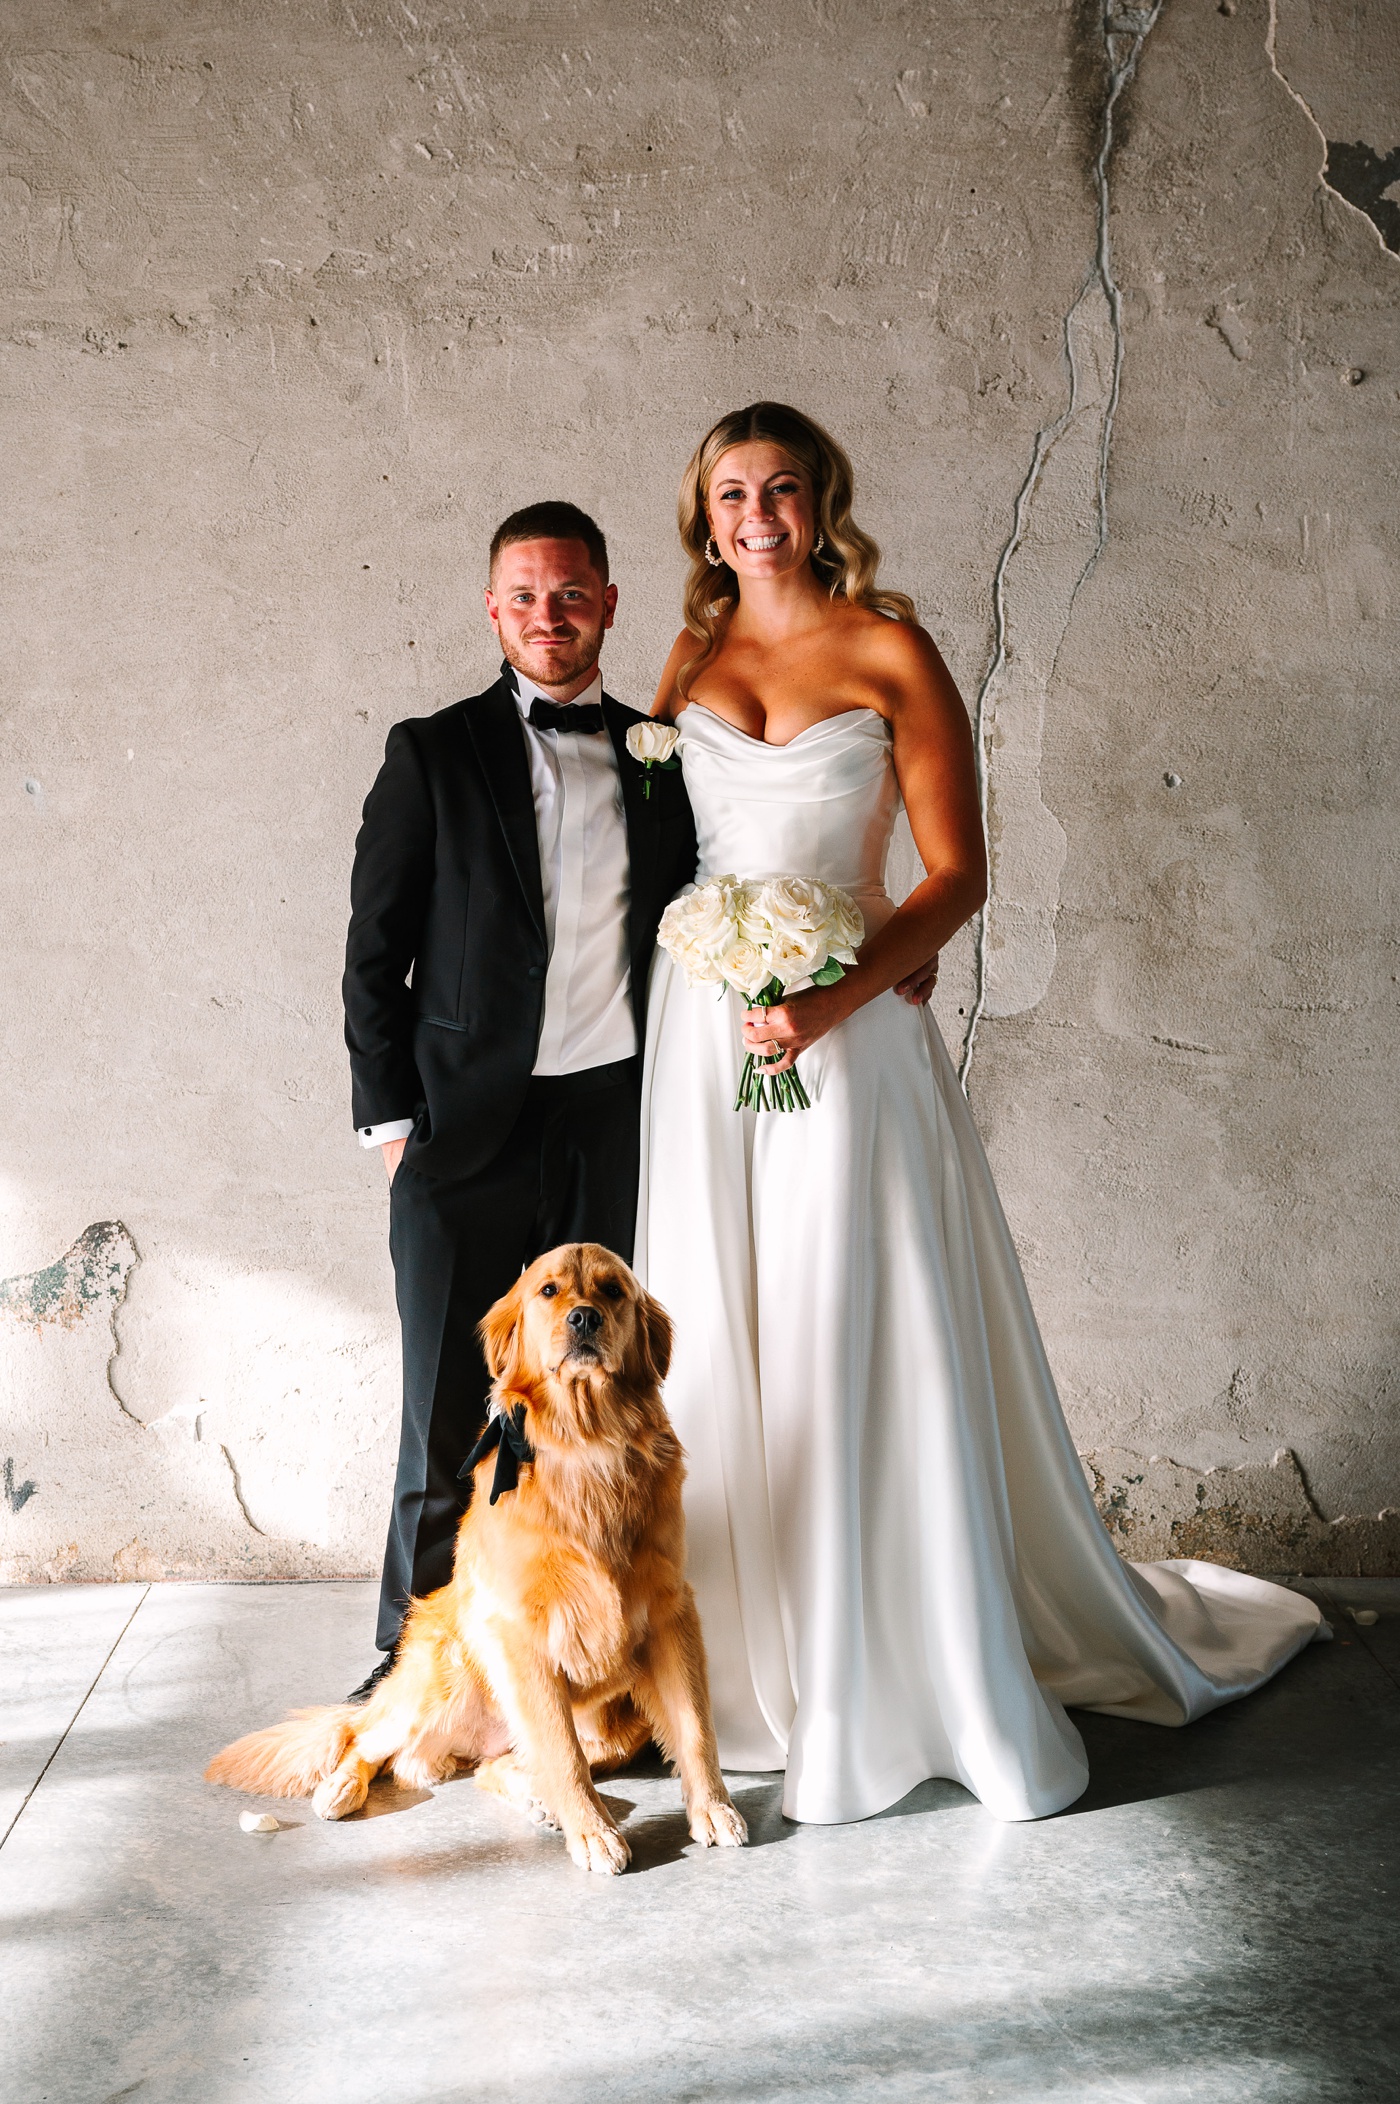 Bride and groom posing with their golden retriever at Ivory Foundry